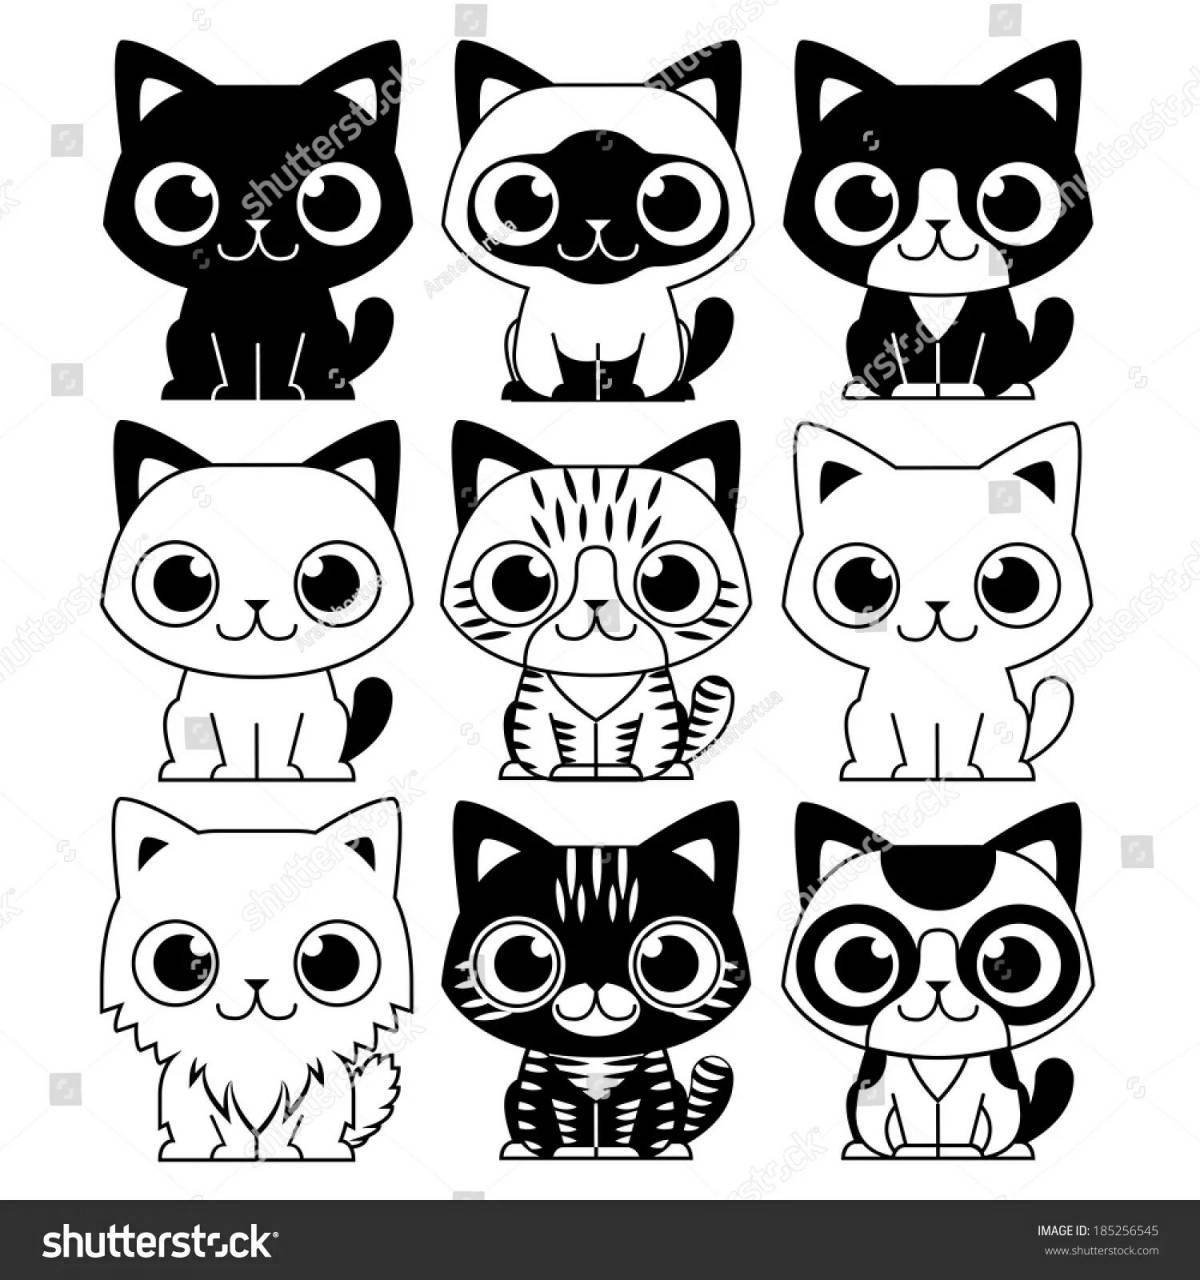 Furry coloring book small cats for stickers